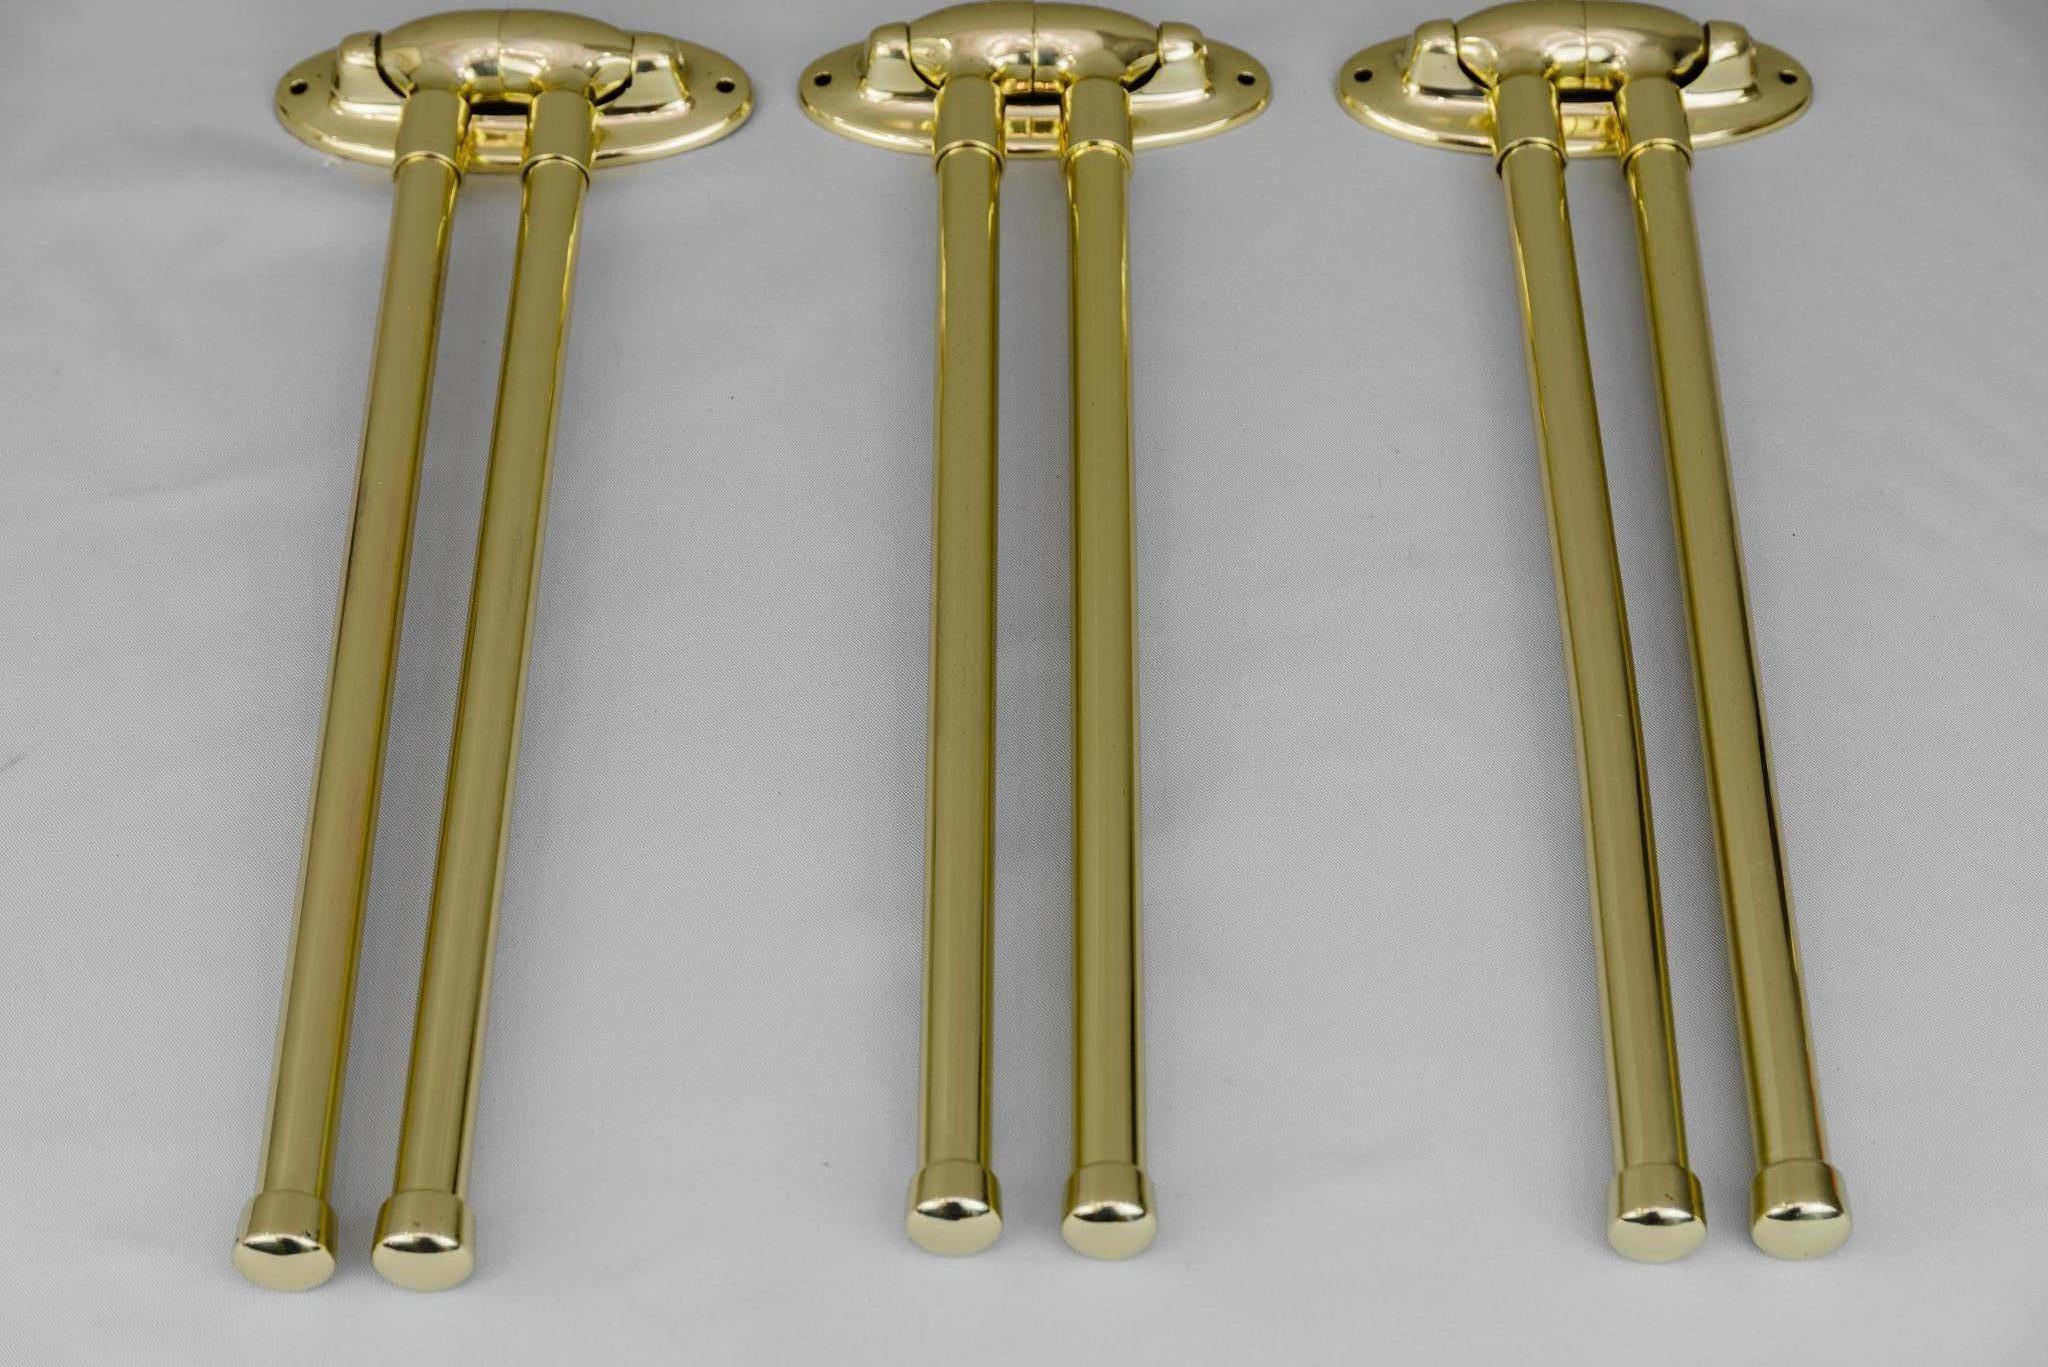 3 identical Art Deco Towel holder, circa 1920s
Price and sale per piece
Polished and stove enameled.